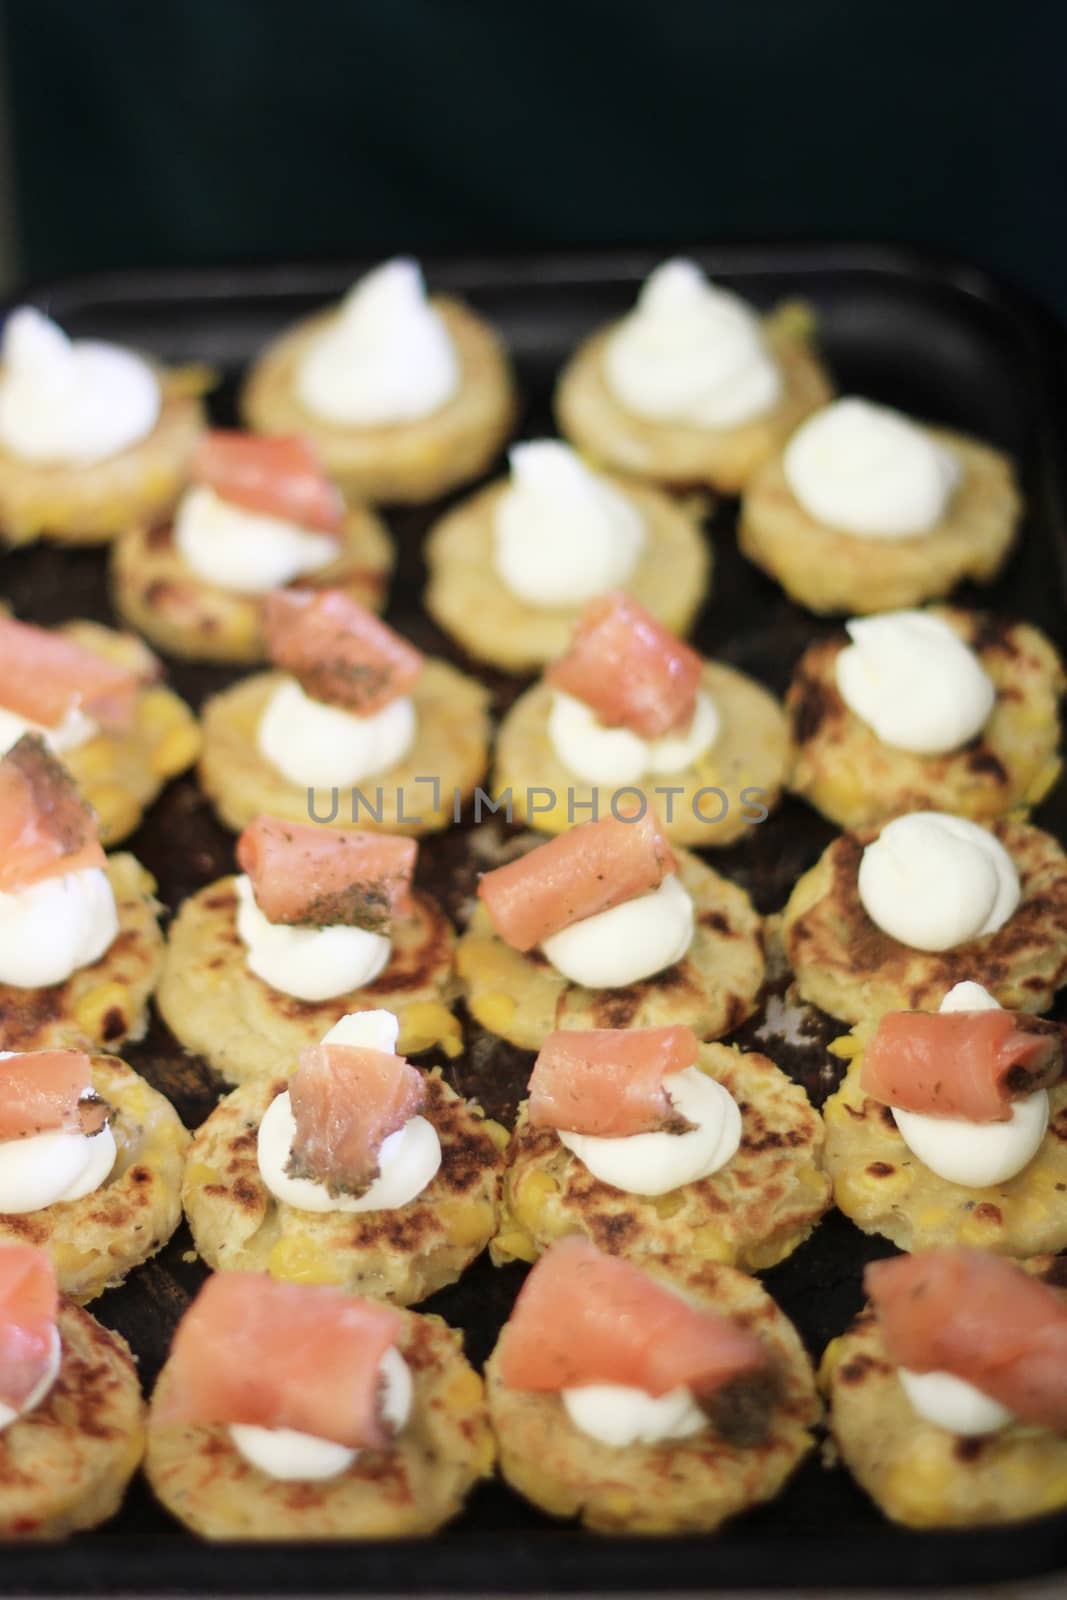 salmon canapes by neil_langan